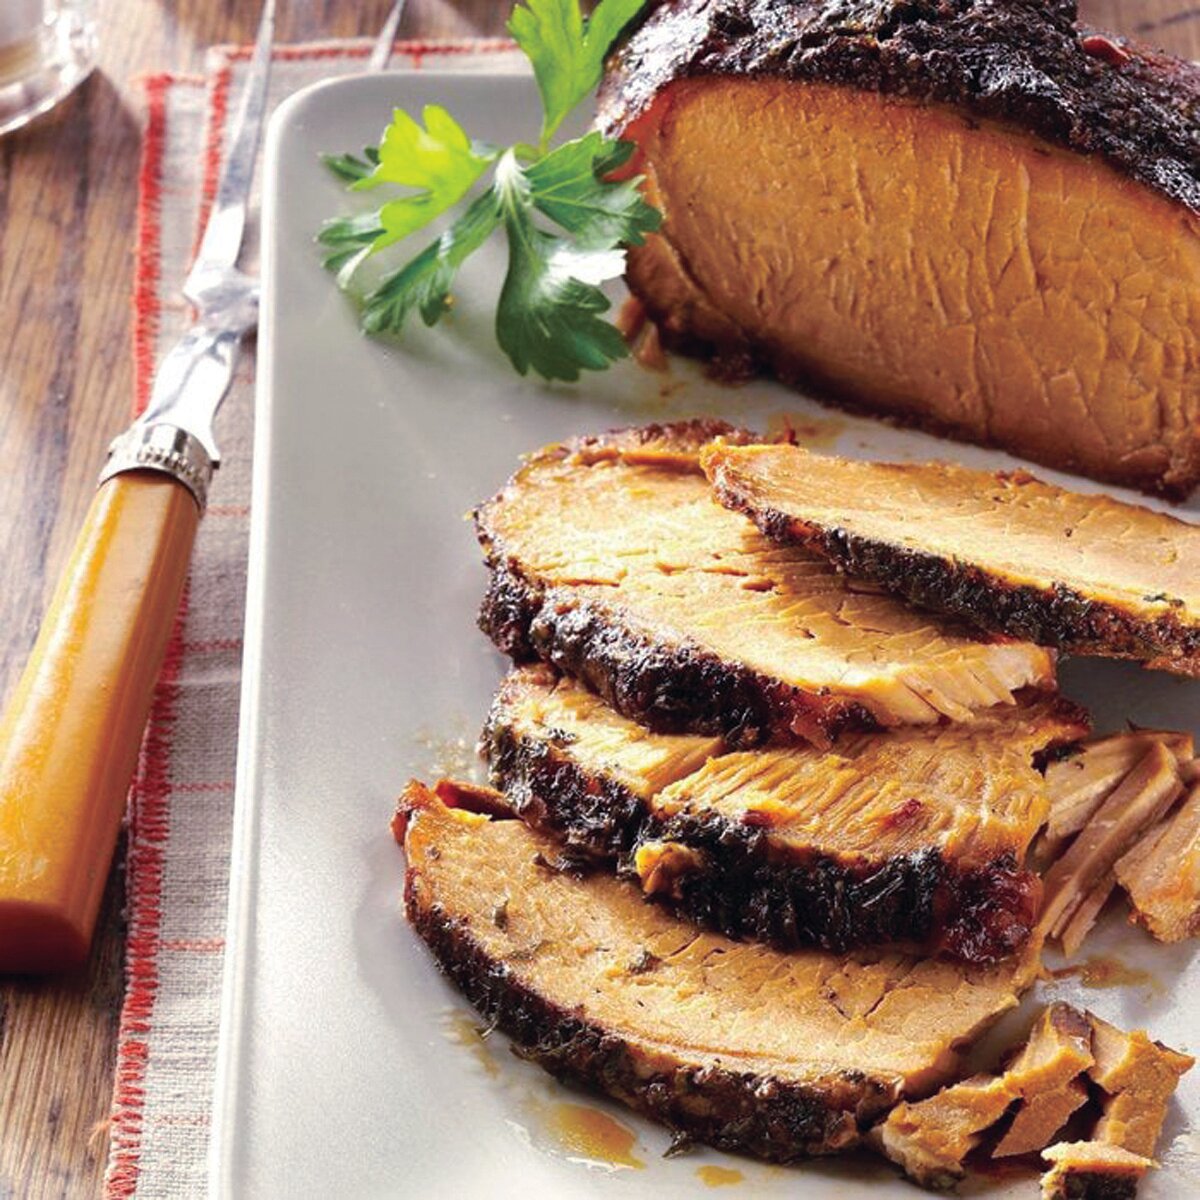 Garlic will be celebrated Oct. 7 and 8 when Easton hosts its annual festival. Meanwhile, meats are a great way to use garlic, including this pork roast.